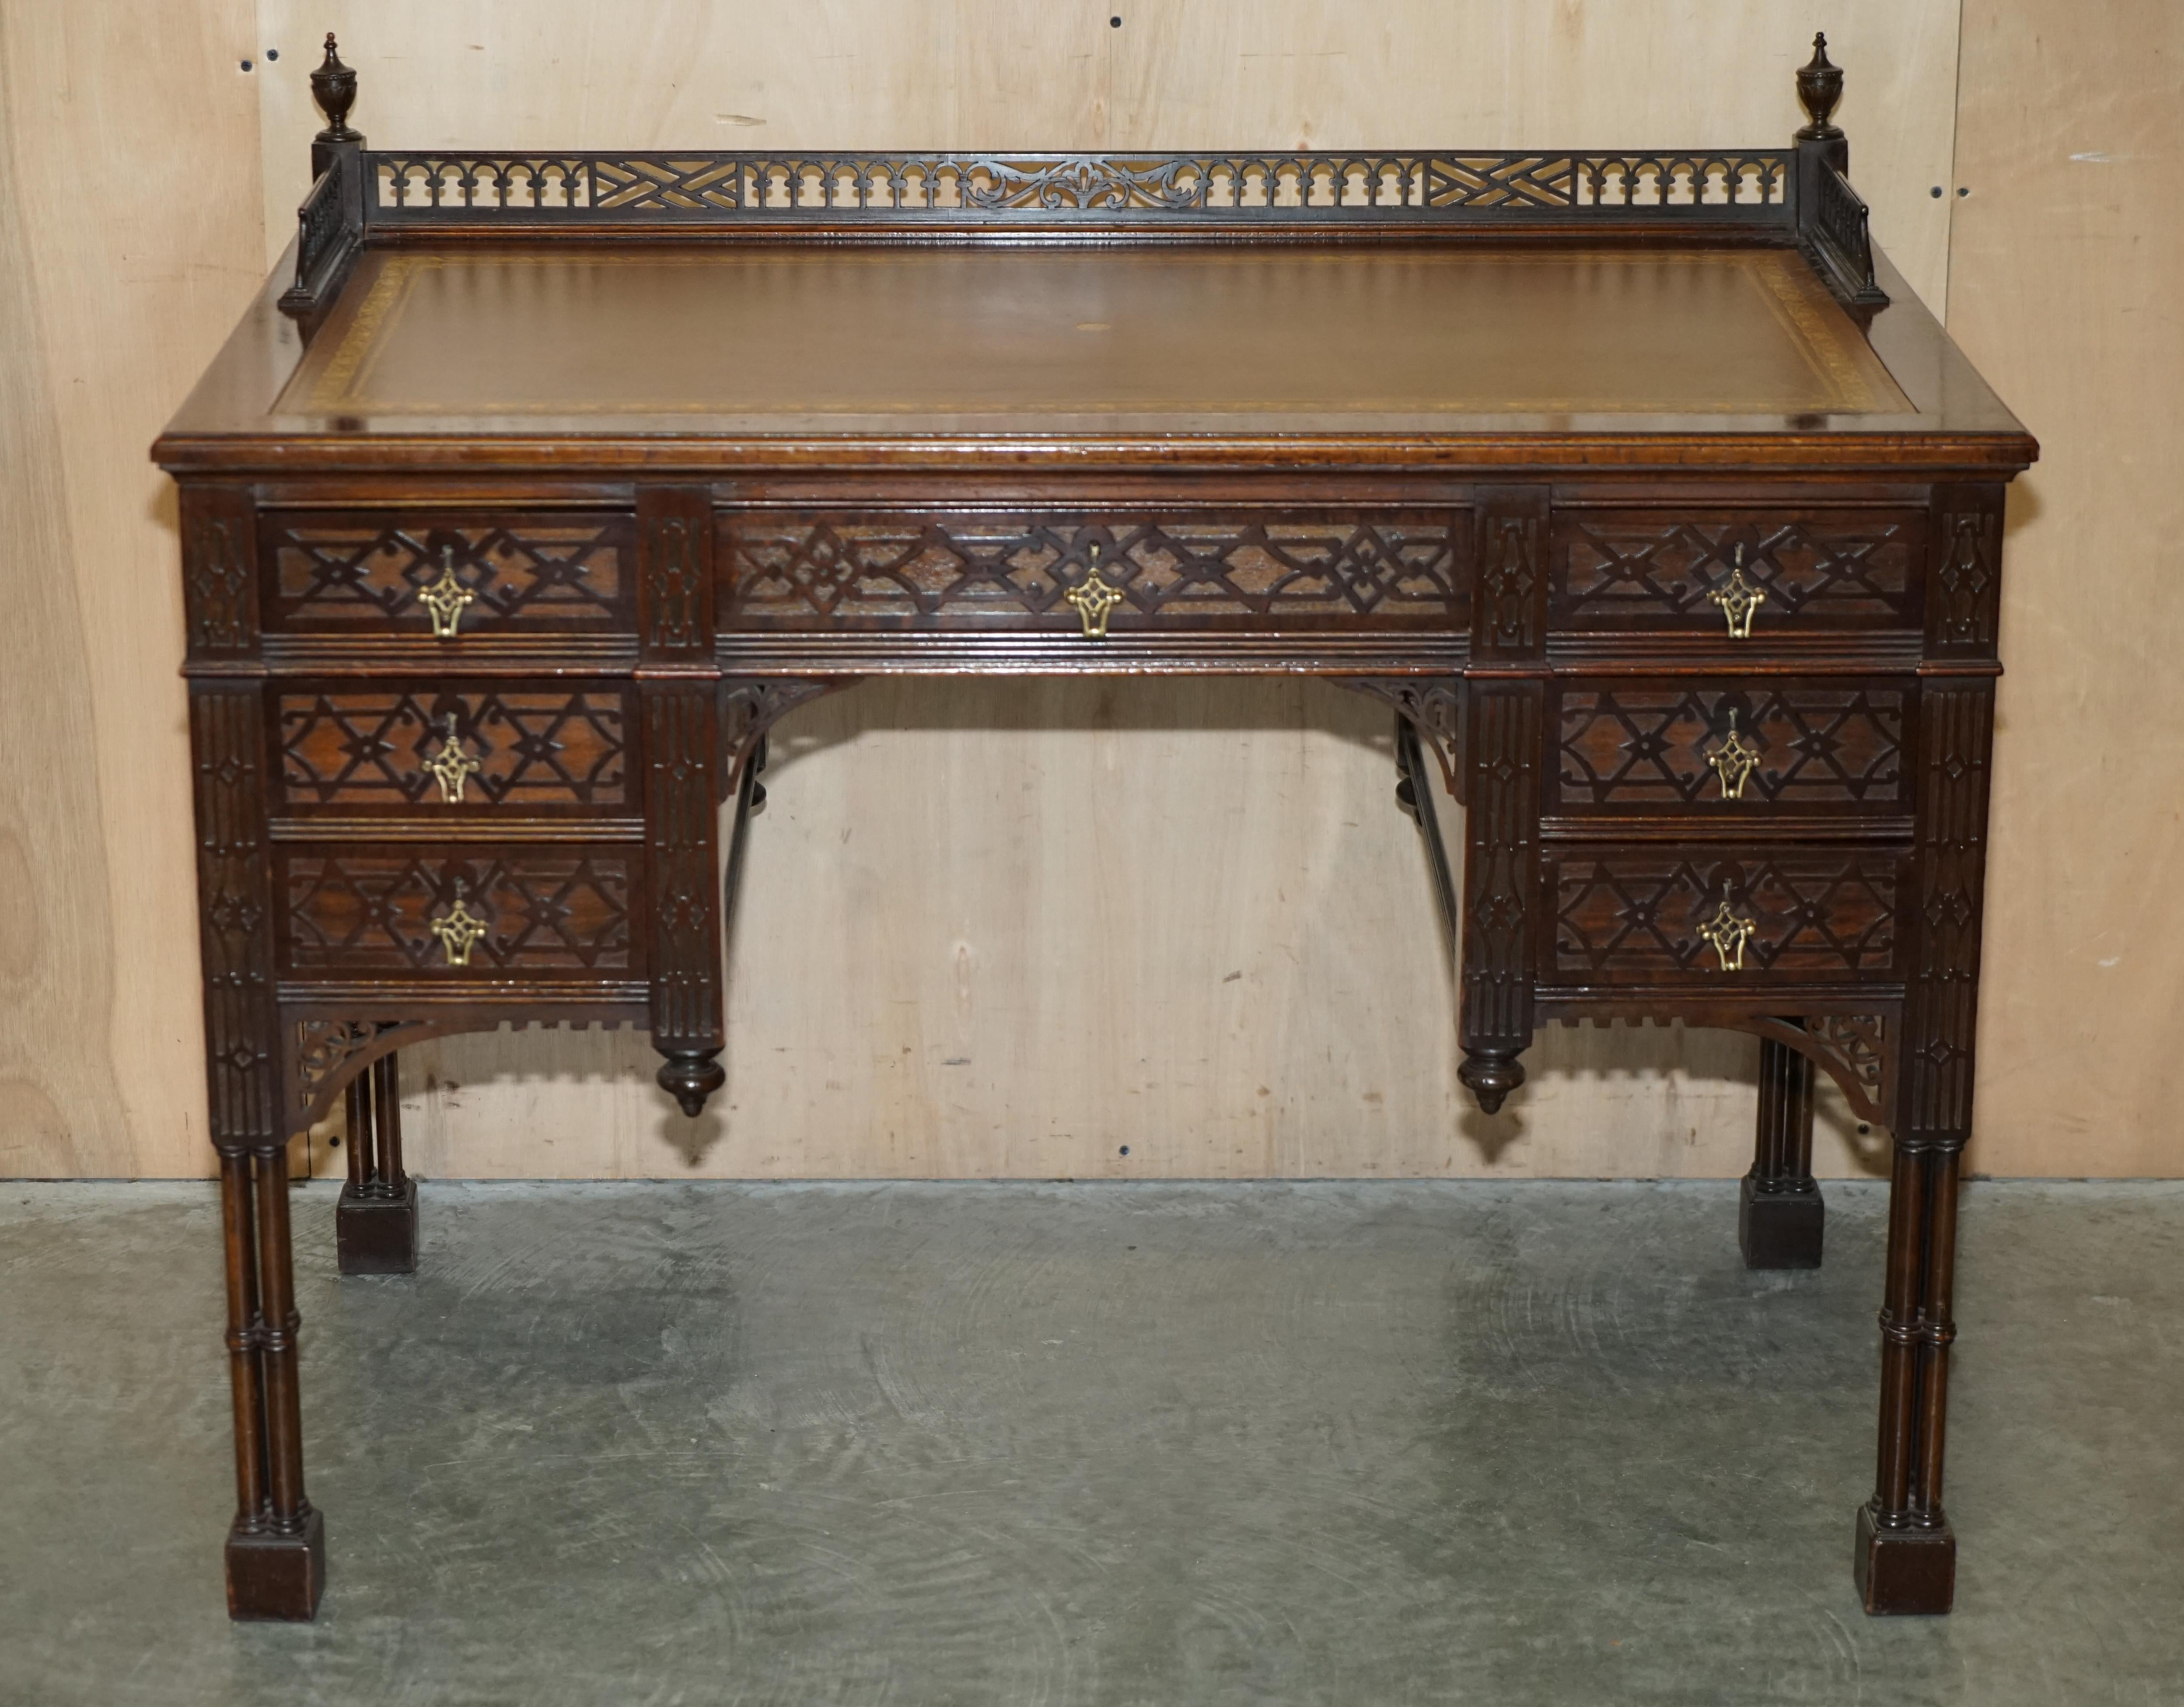 Royal House Antiques

Royal House Antiques is delighted to offer for sale this stunning, exceptionally rare and very fine, fully restored Edward & Roberts stamped, Chinese Chippendale desk 

The firm Edwards and Roberts were among the best